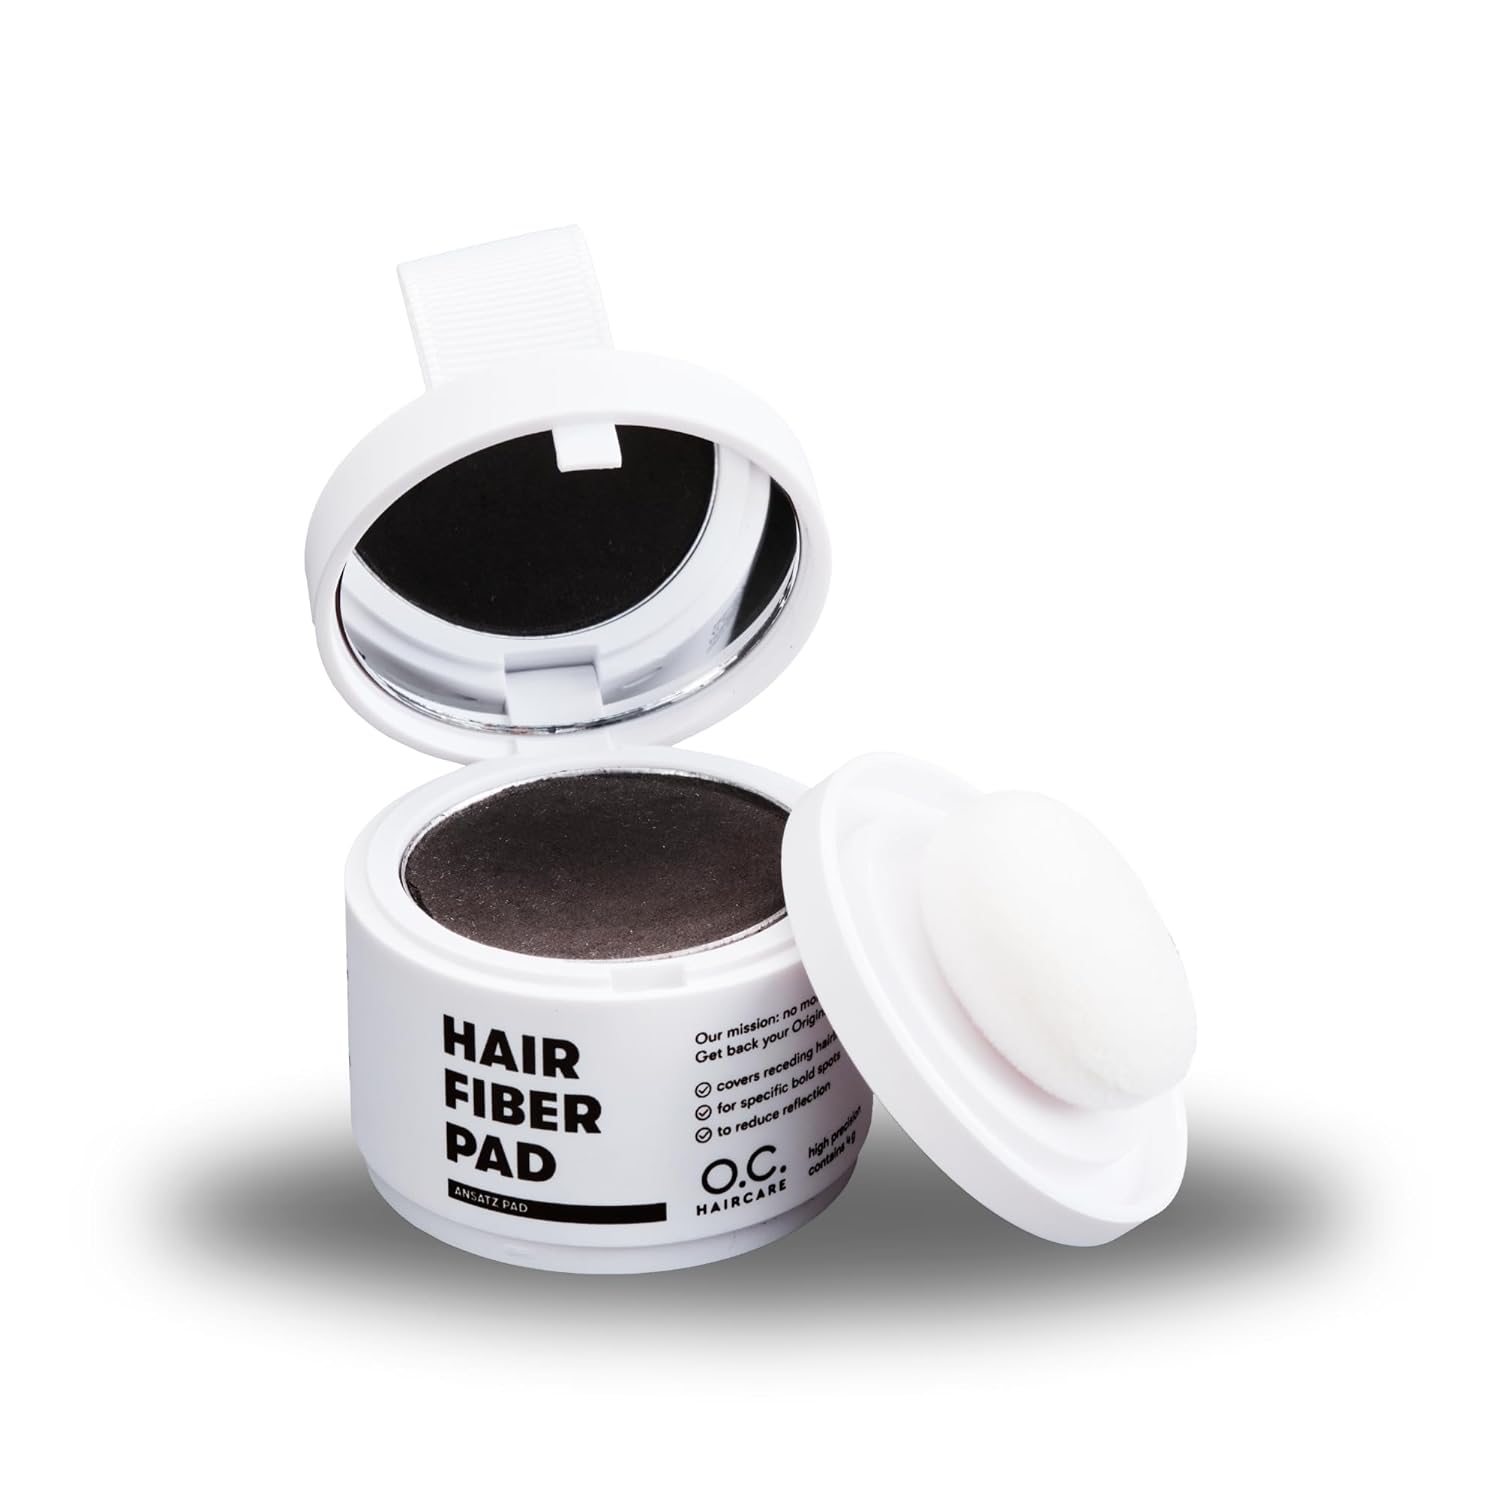 O.C. HAIRCARE Roots Powder for Thickening Hair - For Secret Corners, Parting and Hairline - Recommended by Leading Salons - 8 Colours - Resistant Hair Powder (Dark Brown)